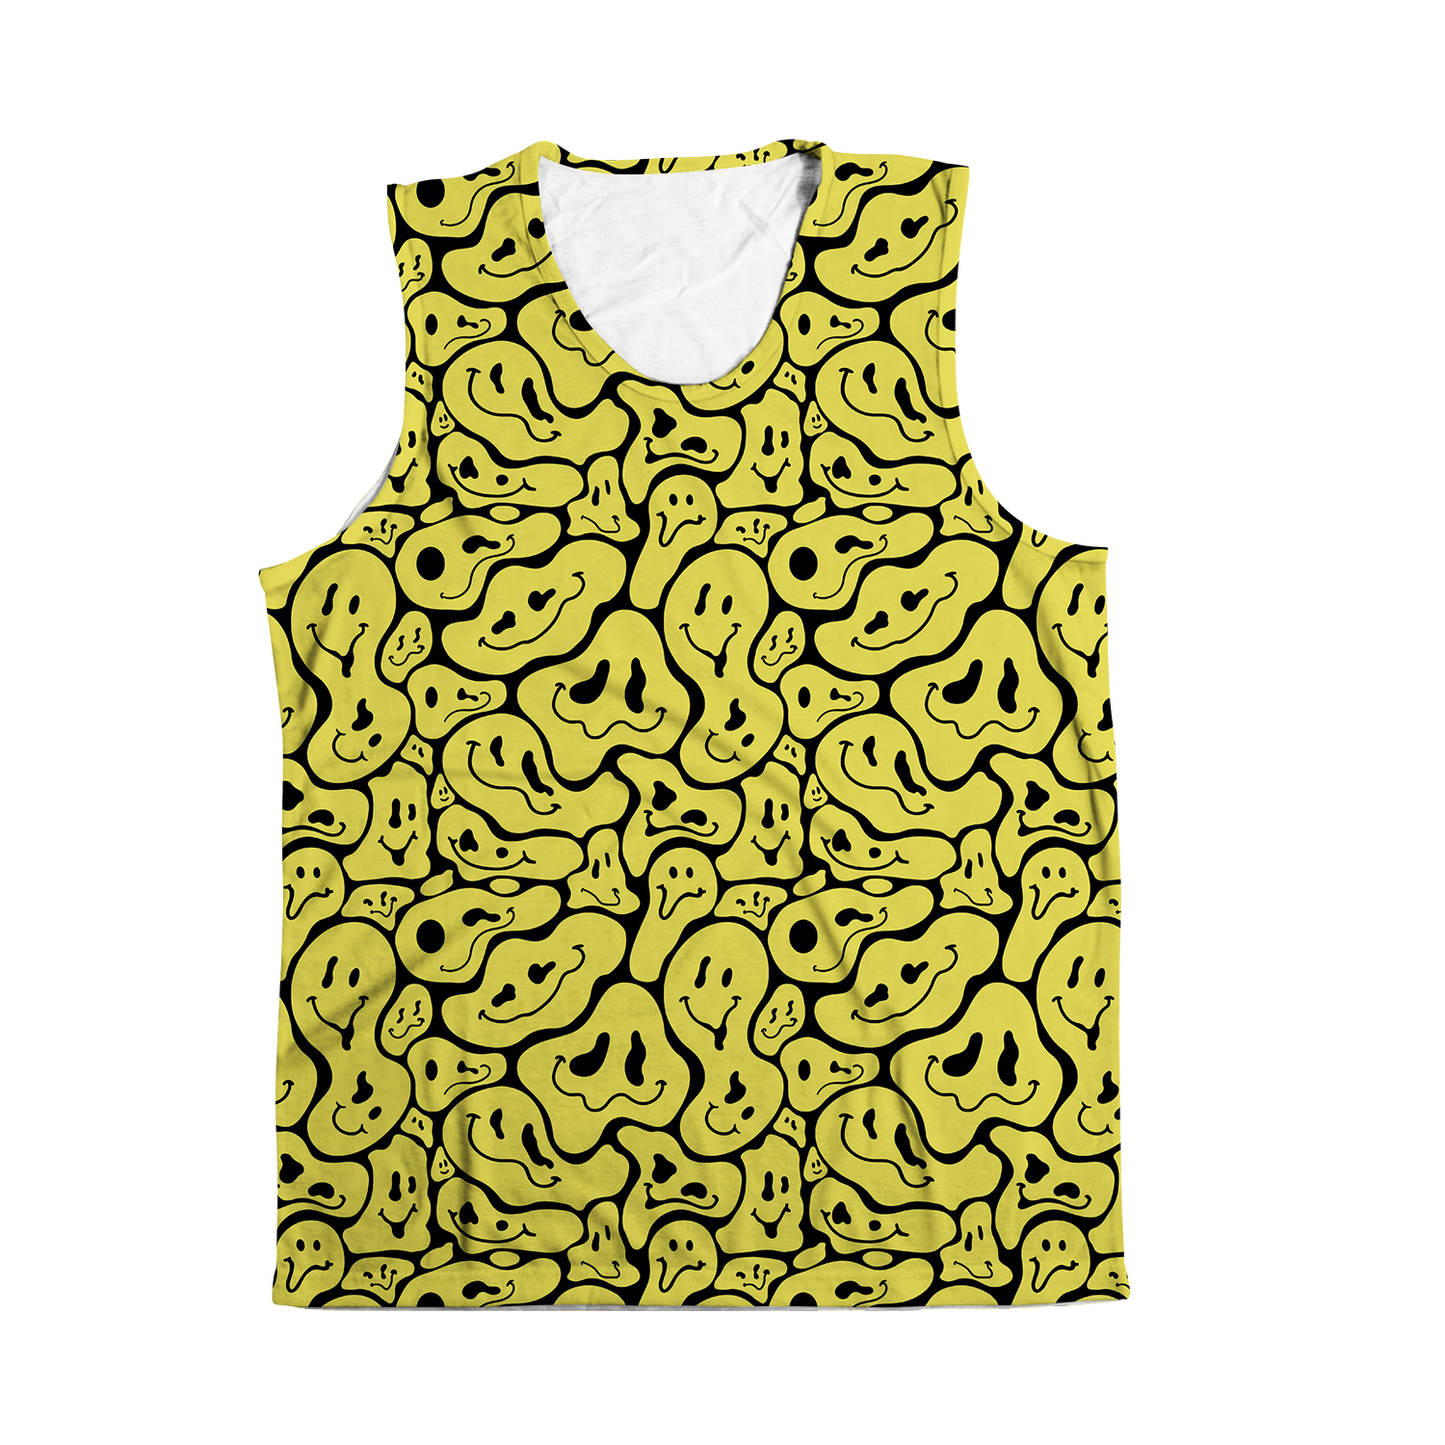 Trippy Smiley Faces All Over Print Sleeveless Tee